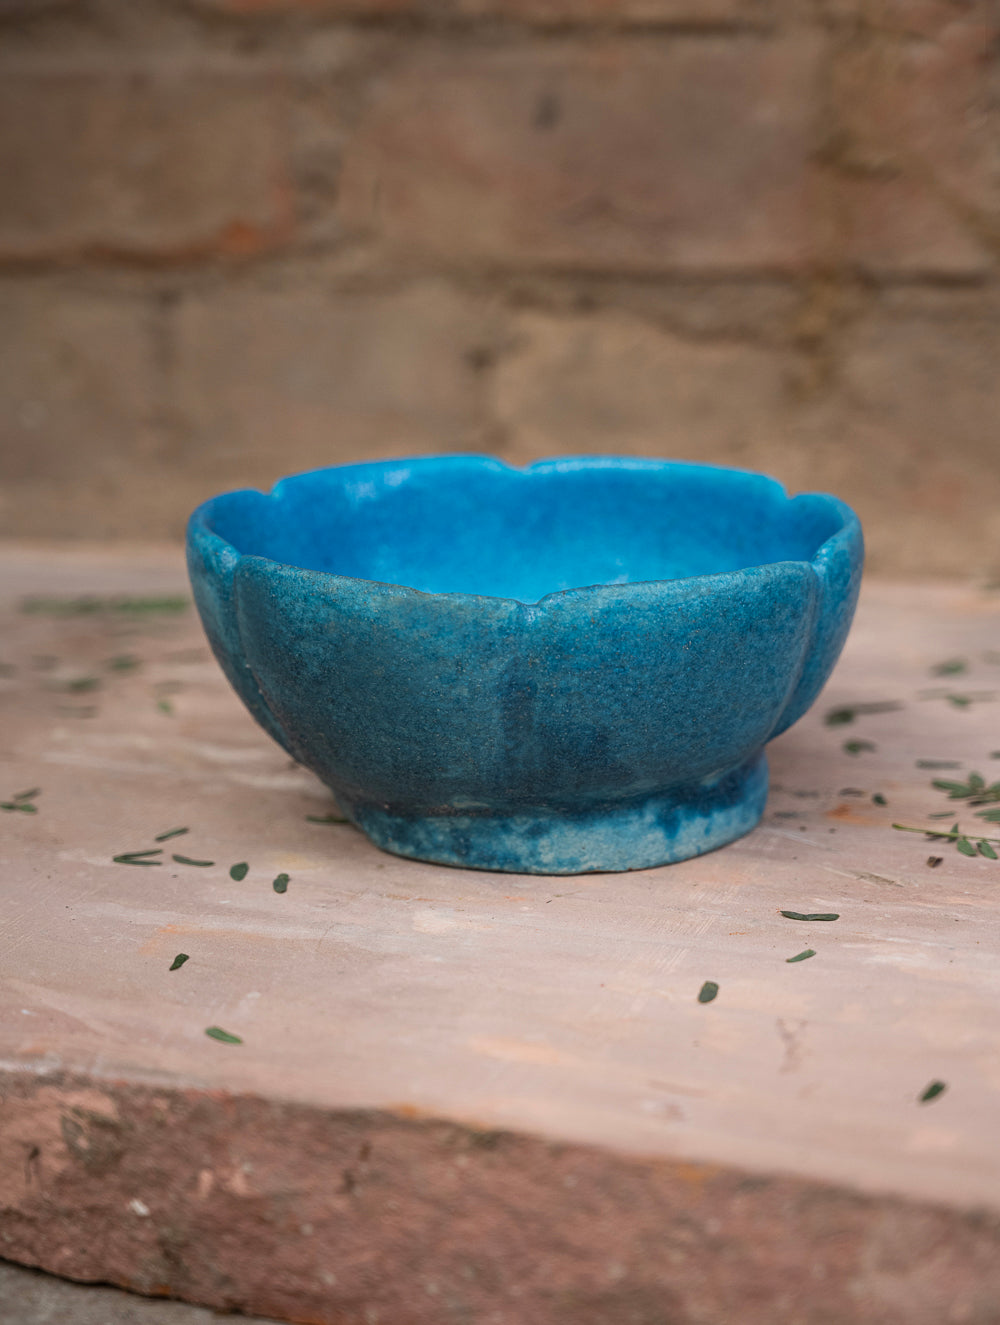 Load image into Gallery viewer, Delhi Blue Art Pottery Curio / Flower Shaped Utility Bowl